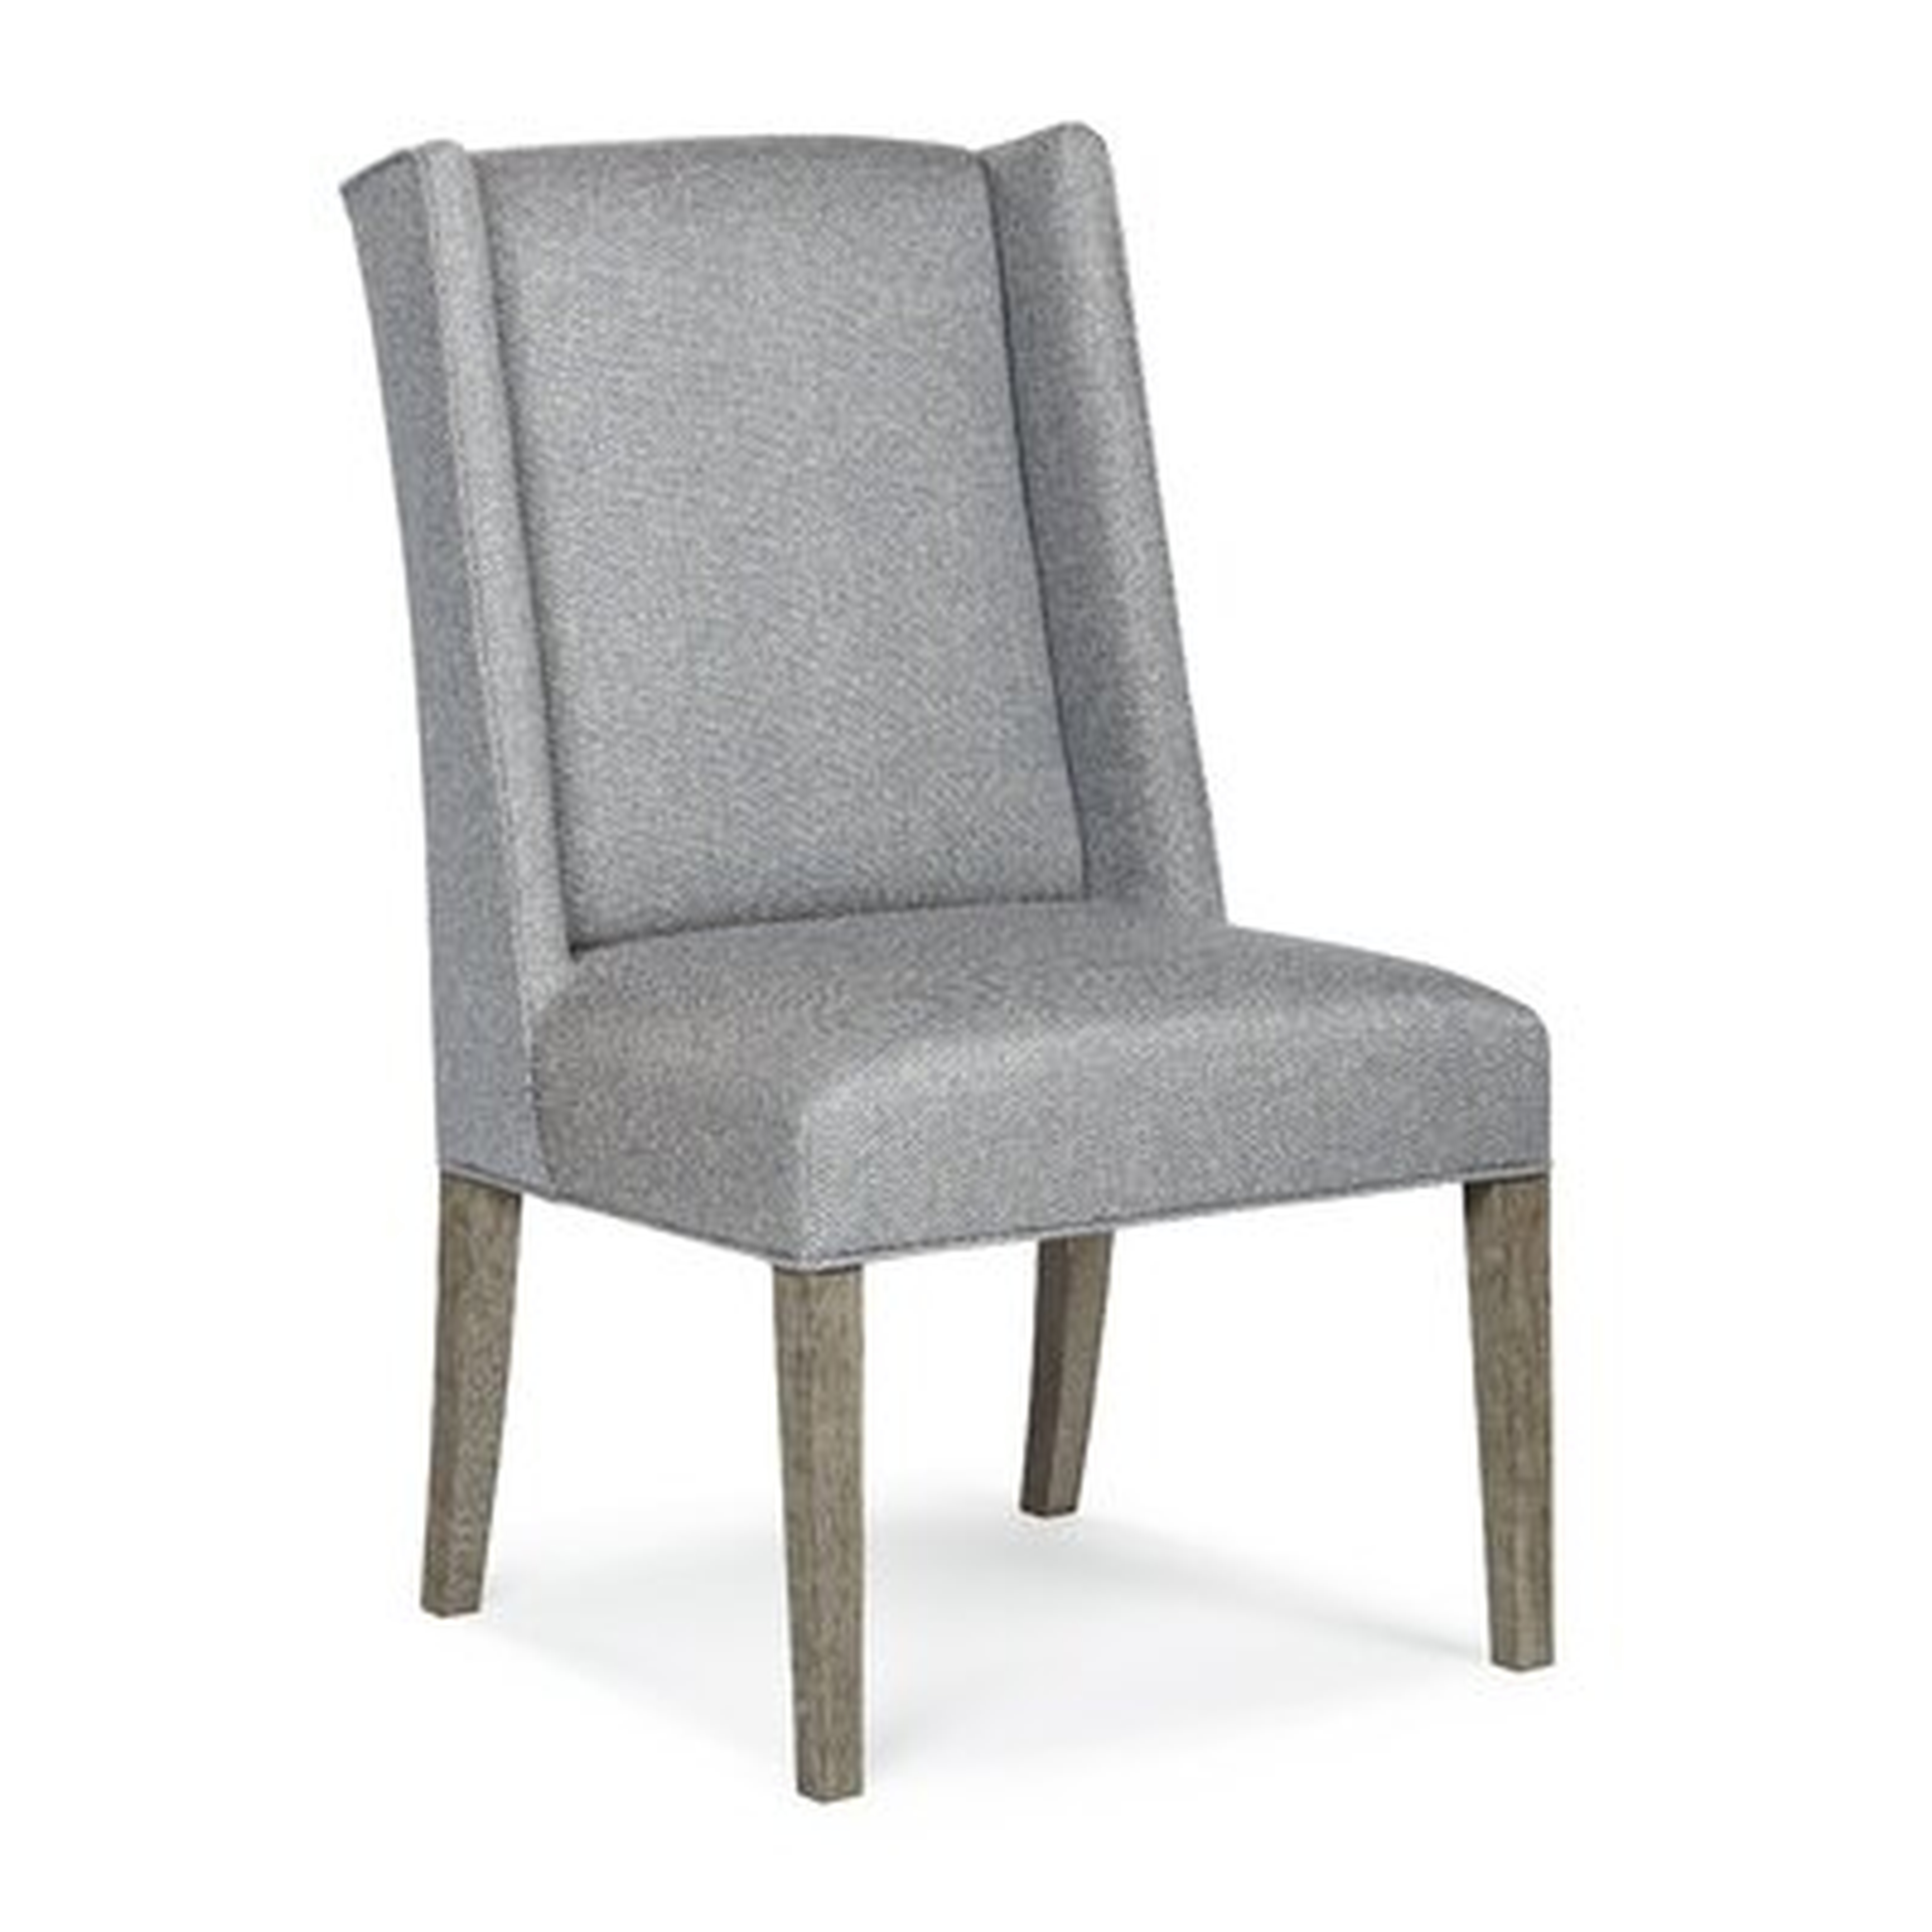 Mitford Upholstered Side Chair (Set of 2) - Wayfair